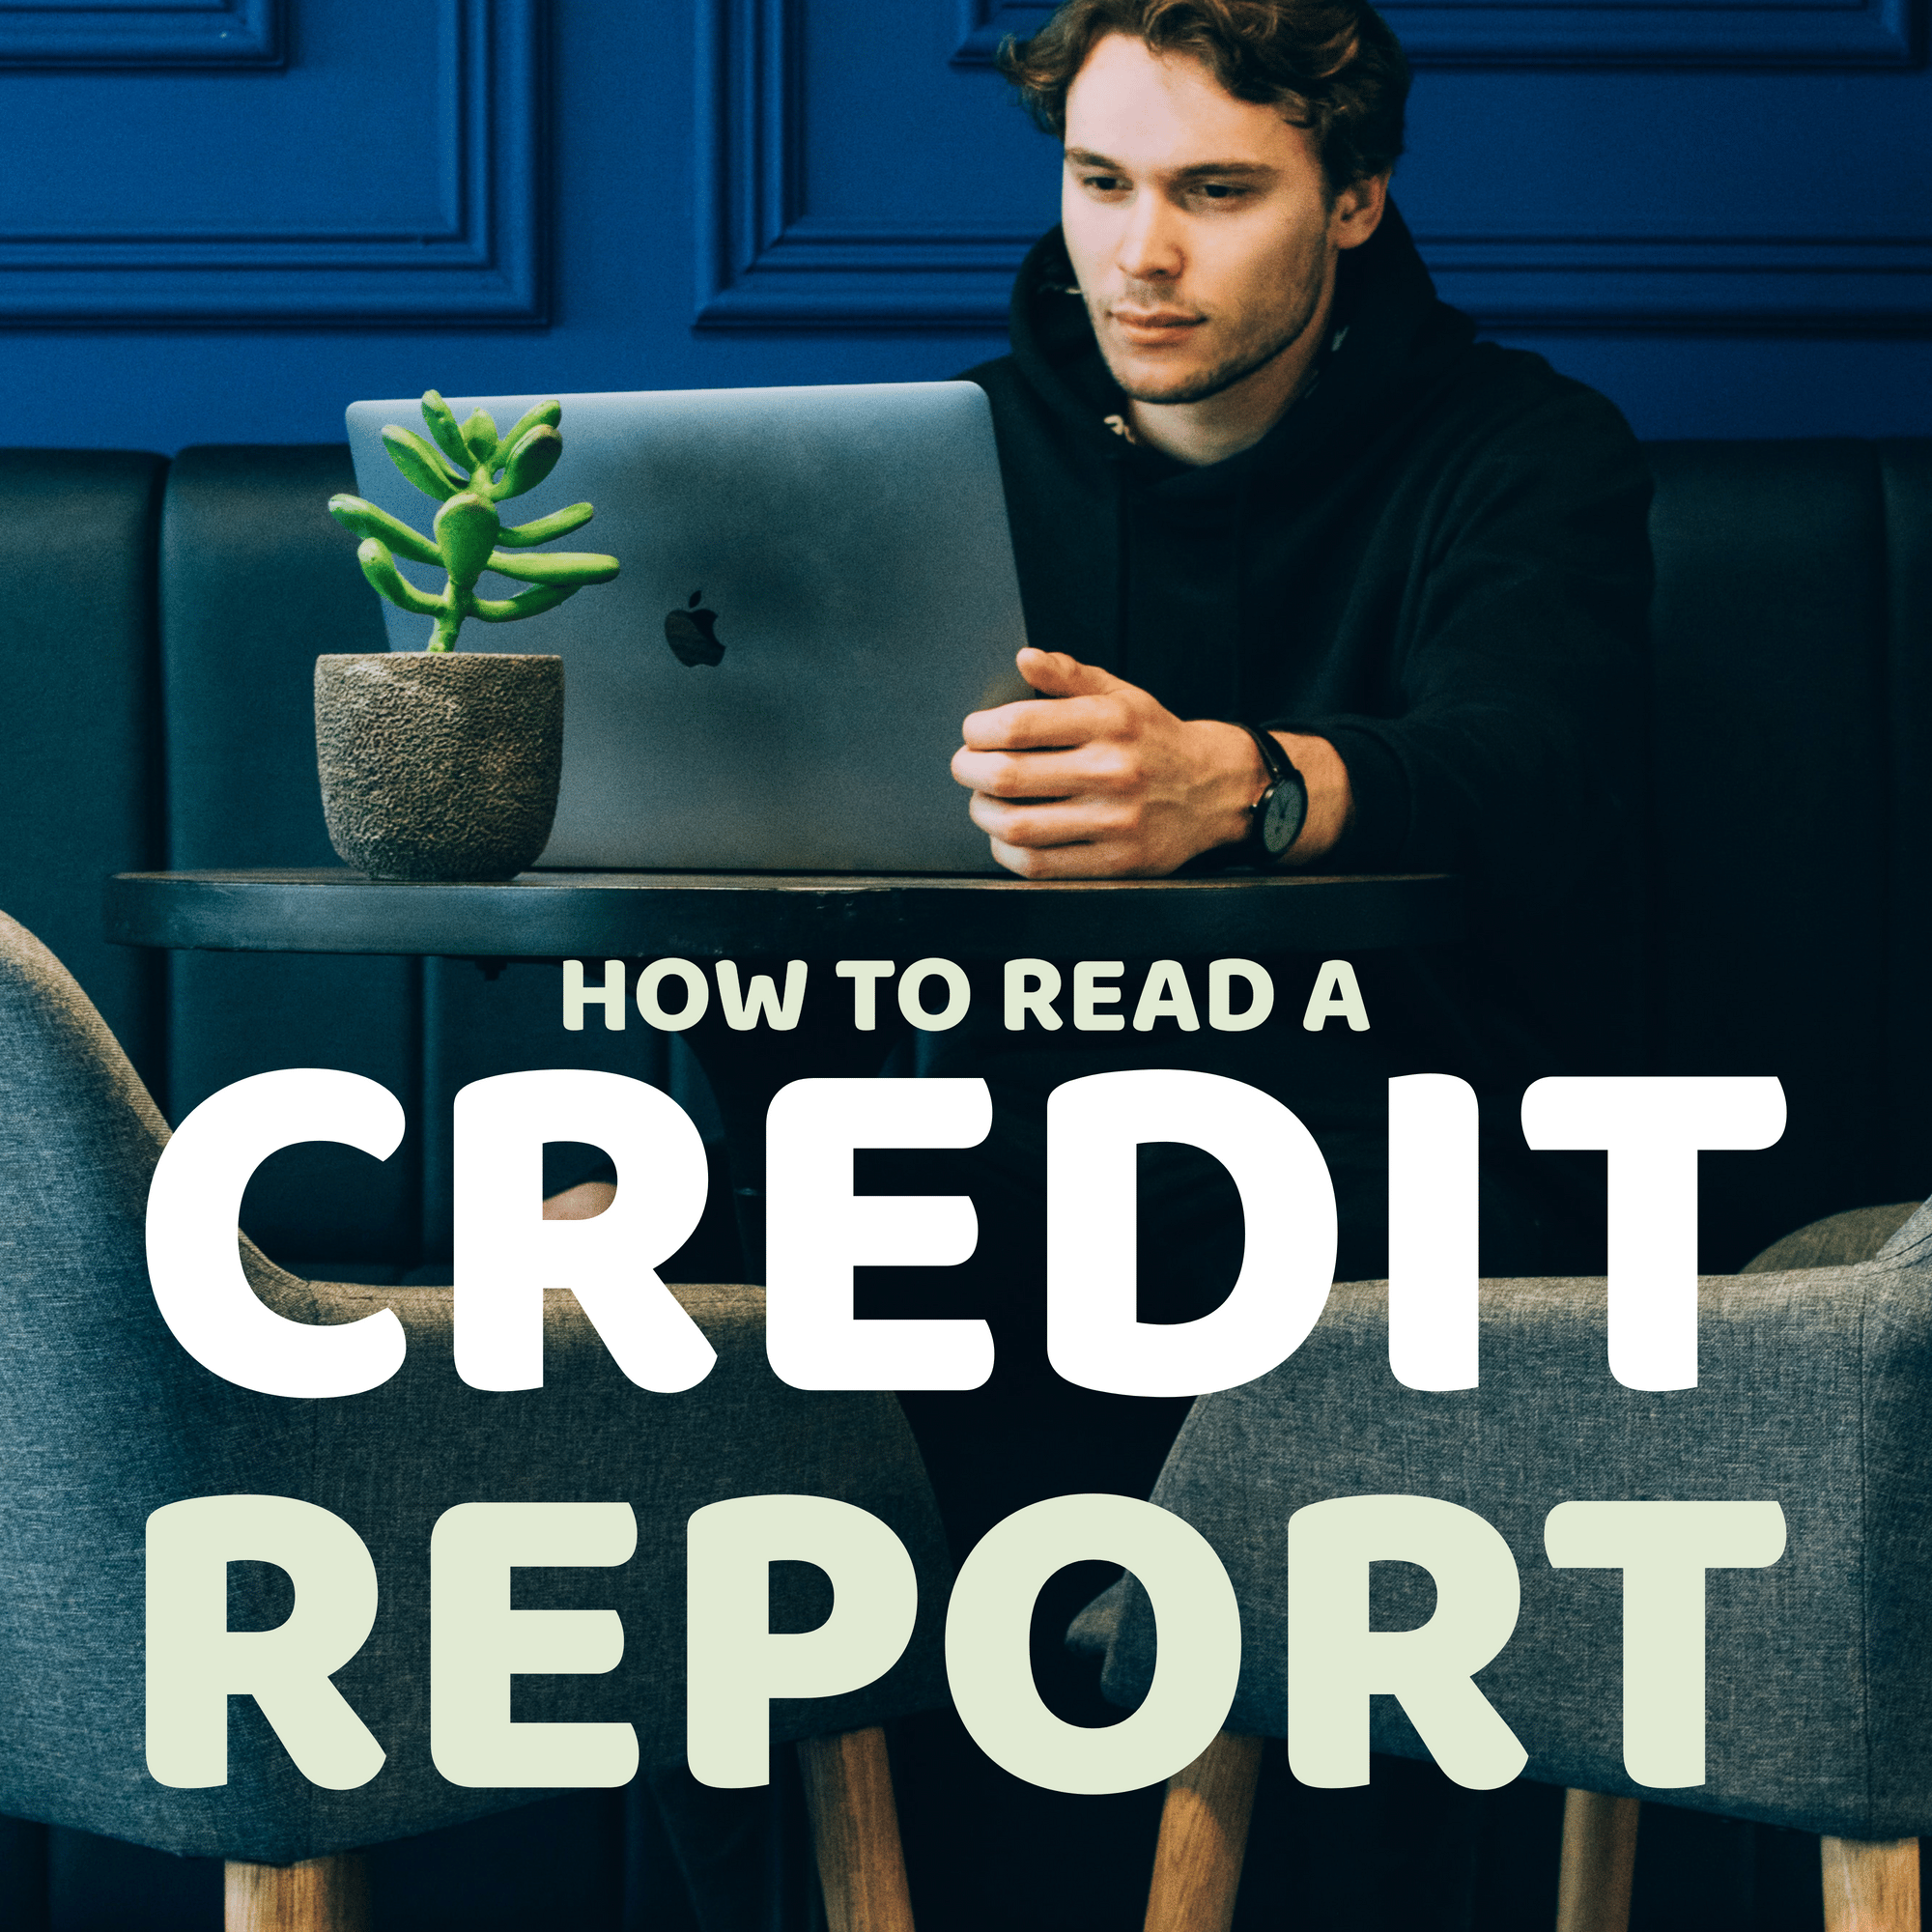 How to read a credit report to find out if you